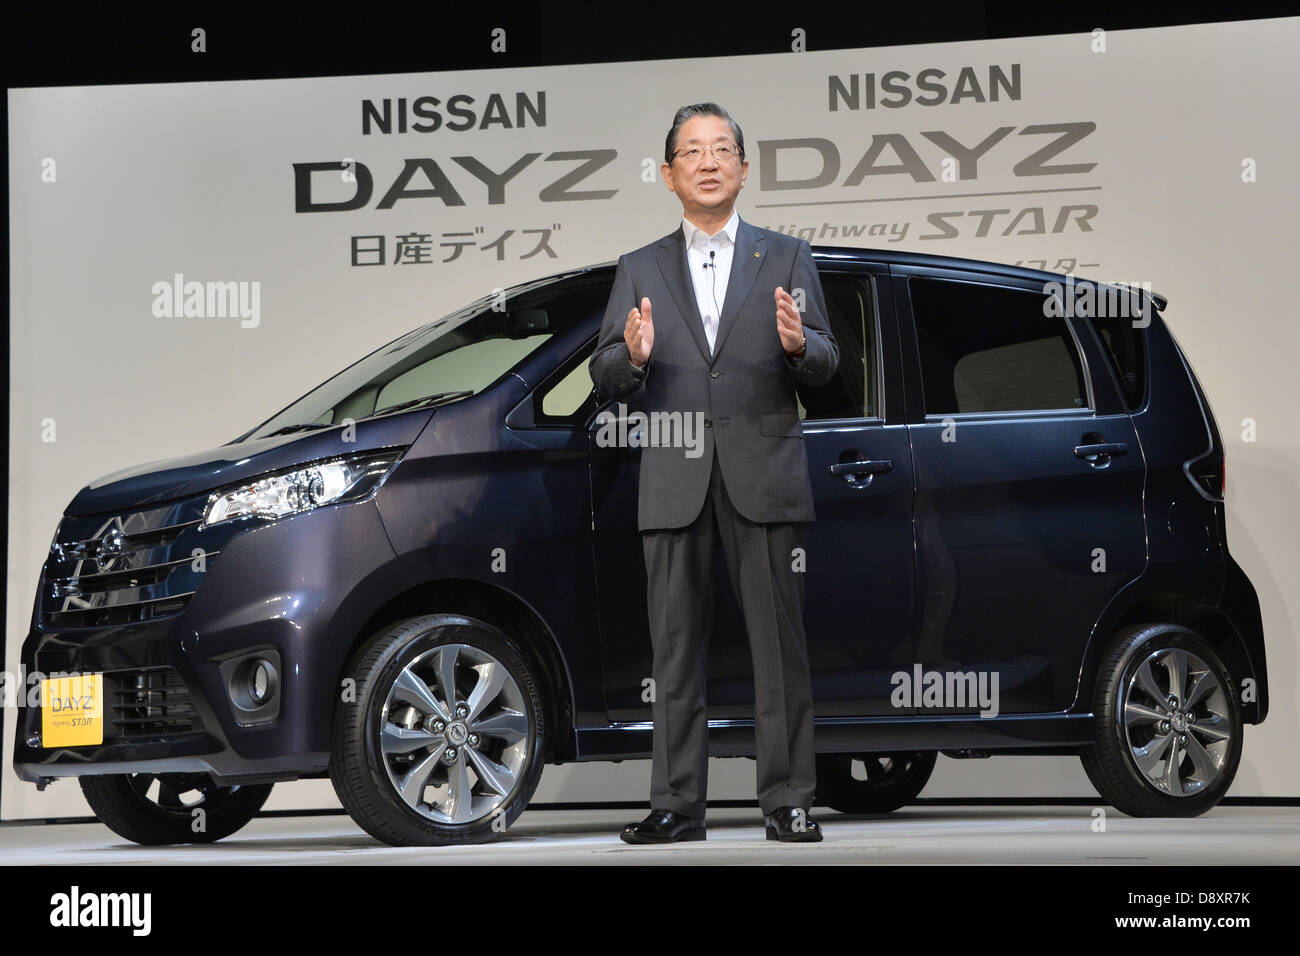 Tokyo, Japan. 6th June 2013. Nissan Motor Company unveiled a new mini-car 'Dayz' in Tokyo, Japan June 6, 2013. Nissan Chief Operating Officer (COO), Toshiyuki Shiga, showed the idea which aims to more than 10% domestic market share of mini-cars.  (Photo by Natsuki Sakai/AFLO/Alamy Live News) Stock Photo